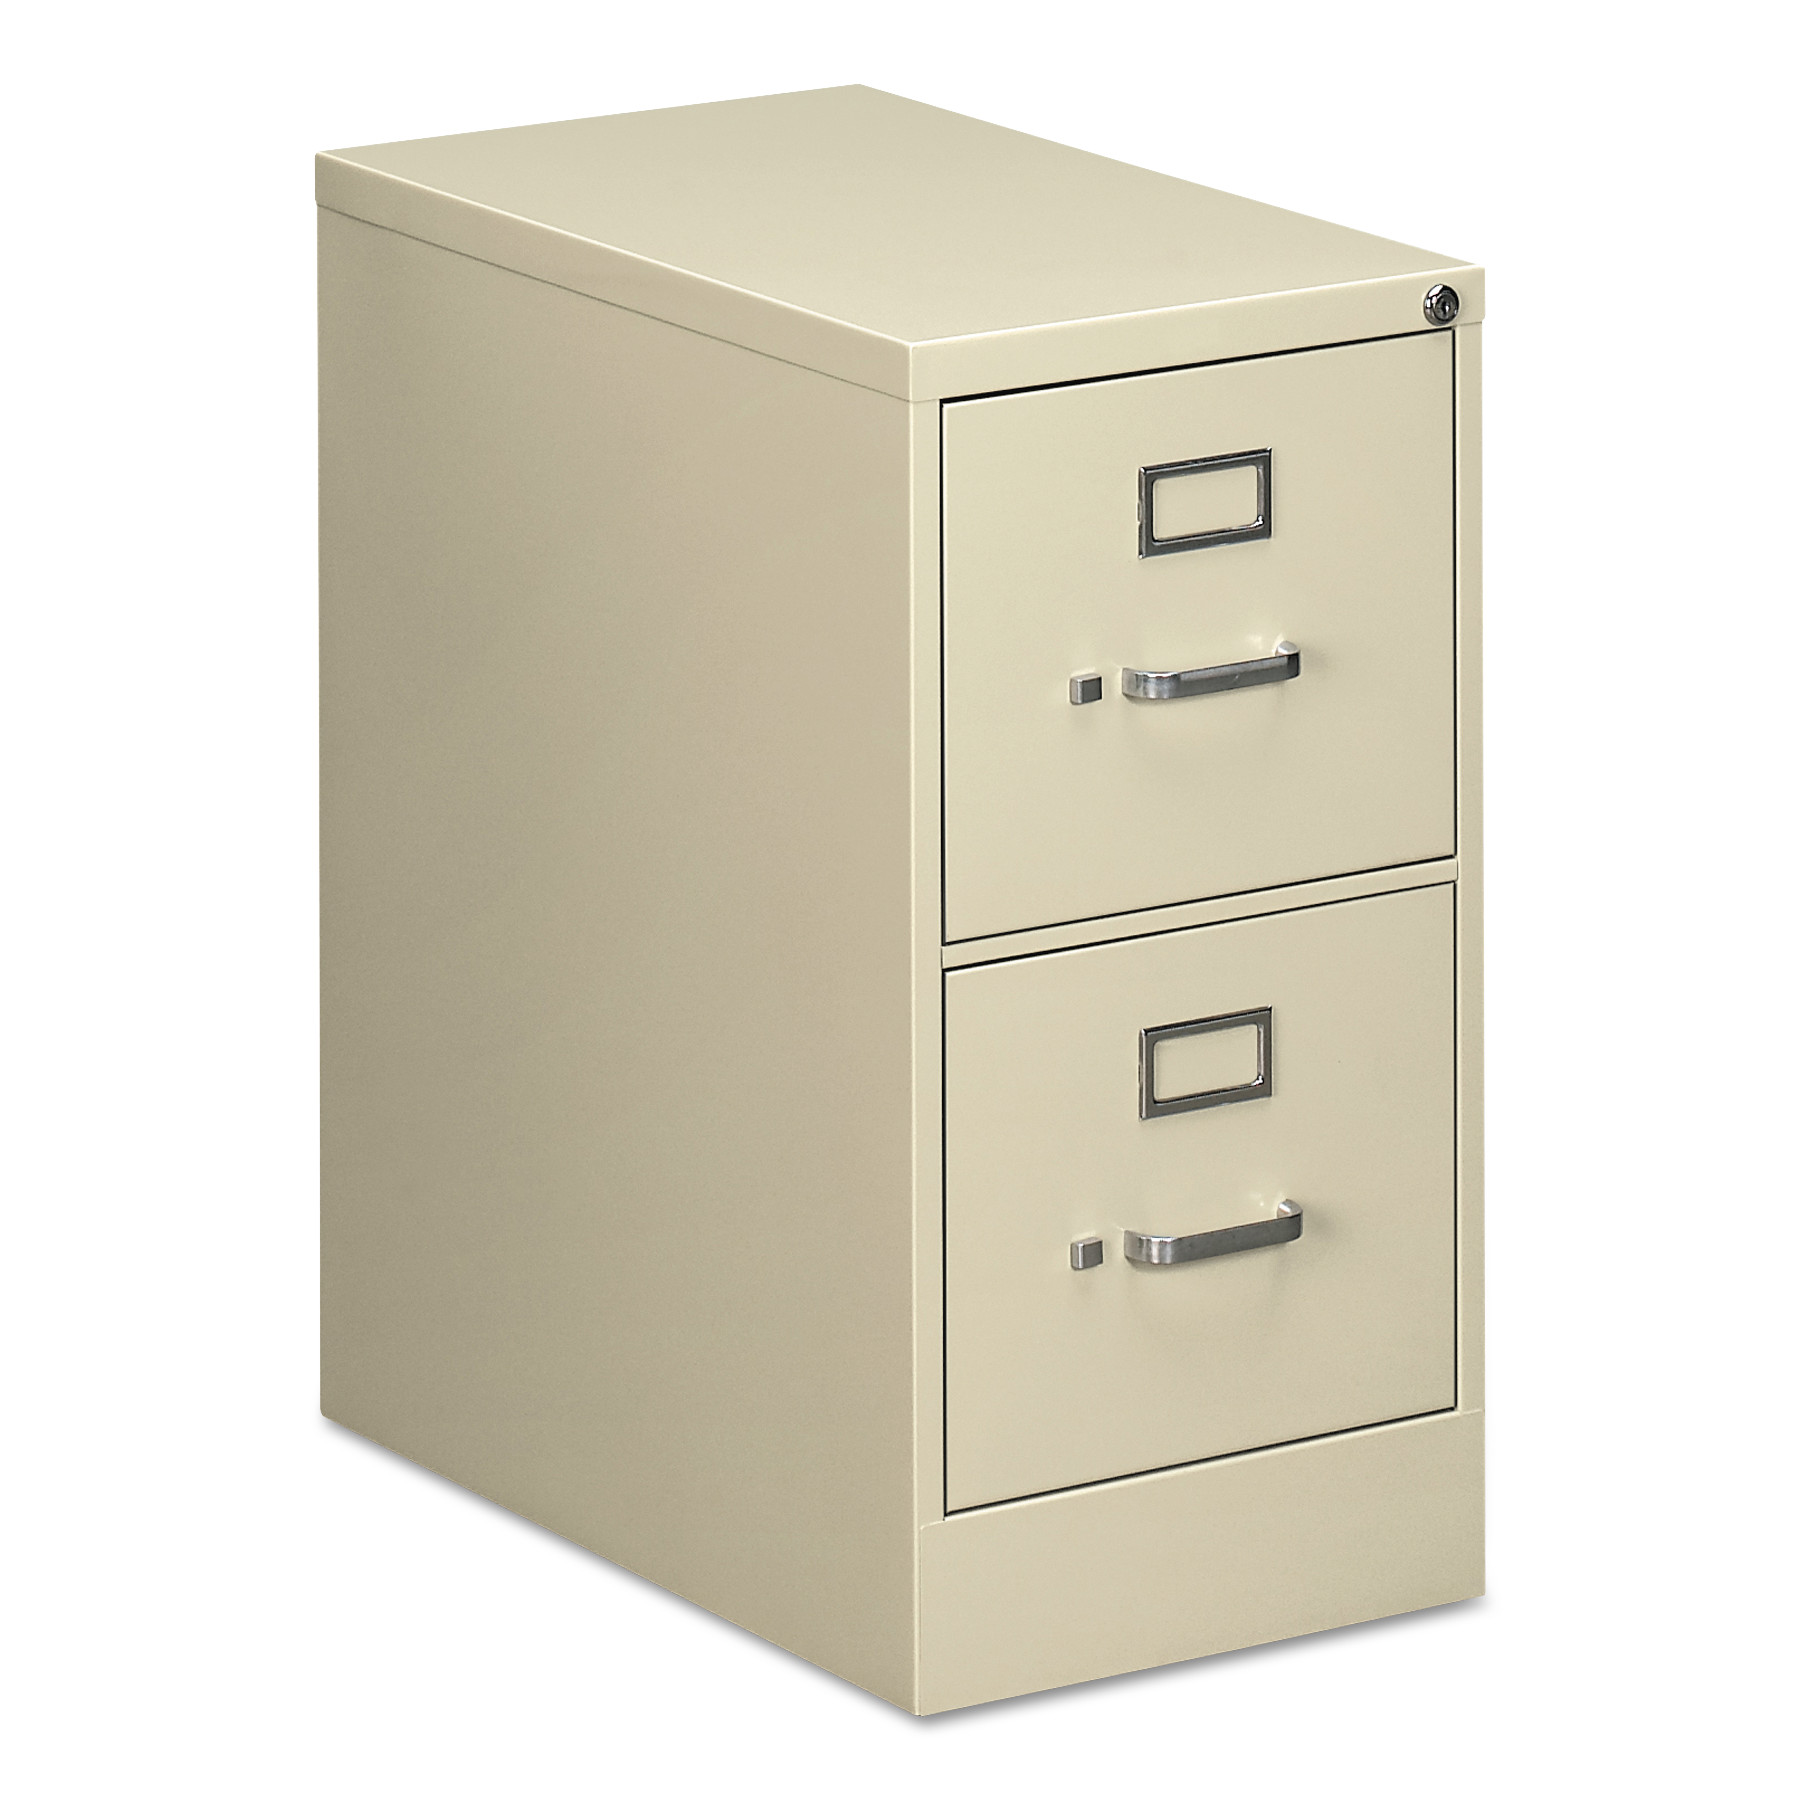  Alera VF1529PY Two-Drawer Economy Vertical File Cabinet, Letter, 15w x 25d x 29h, Putty (ALEVF1529PY) 